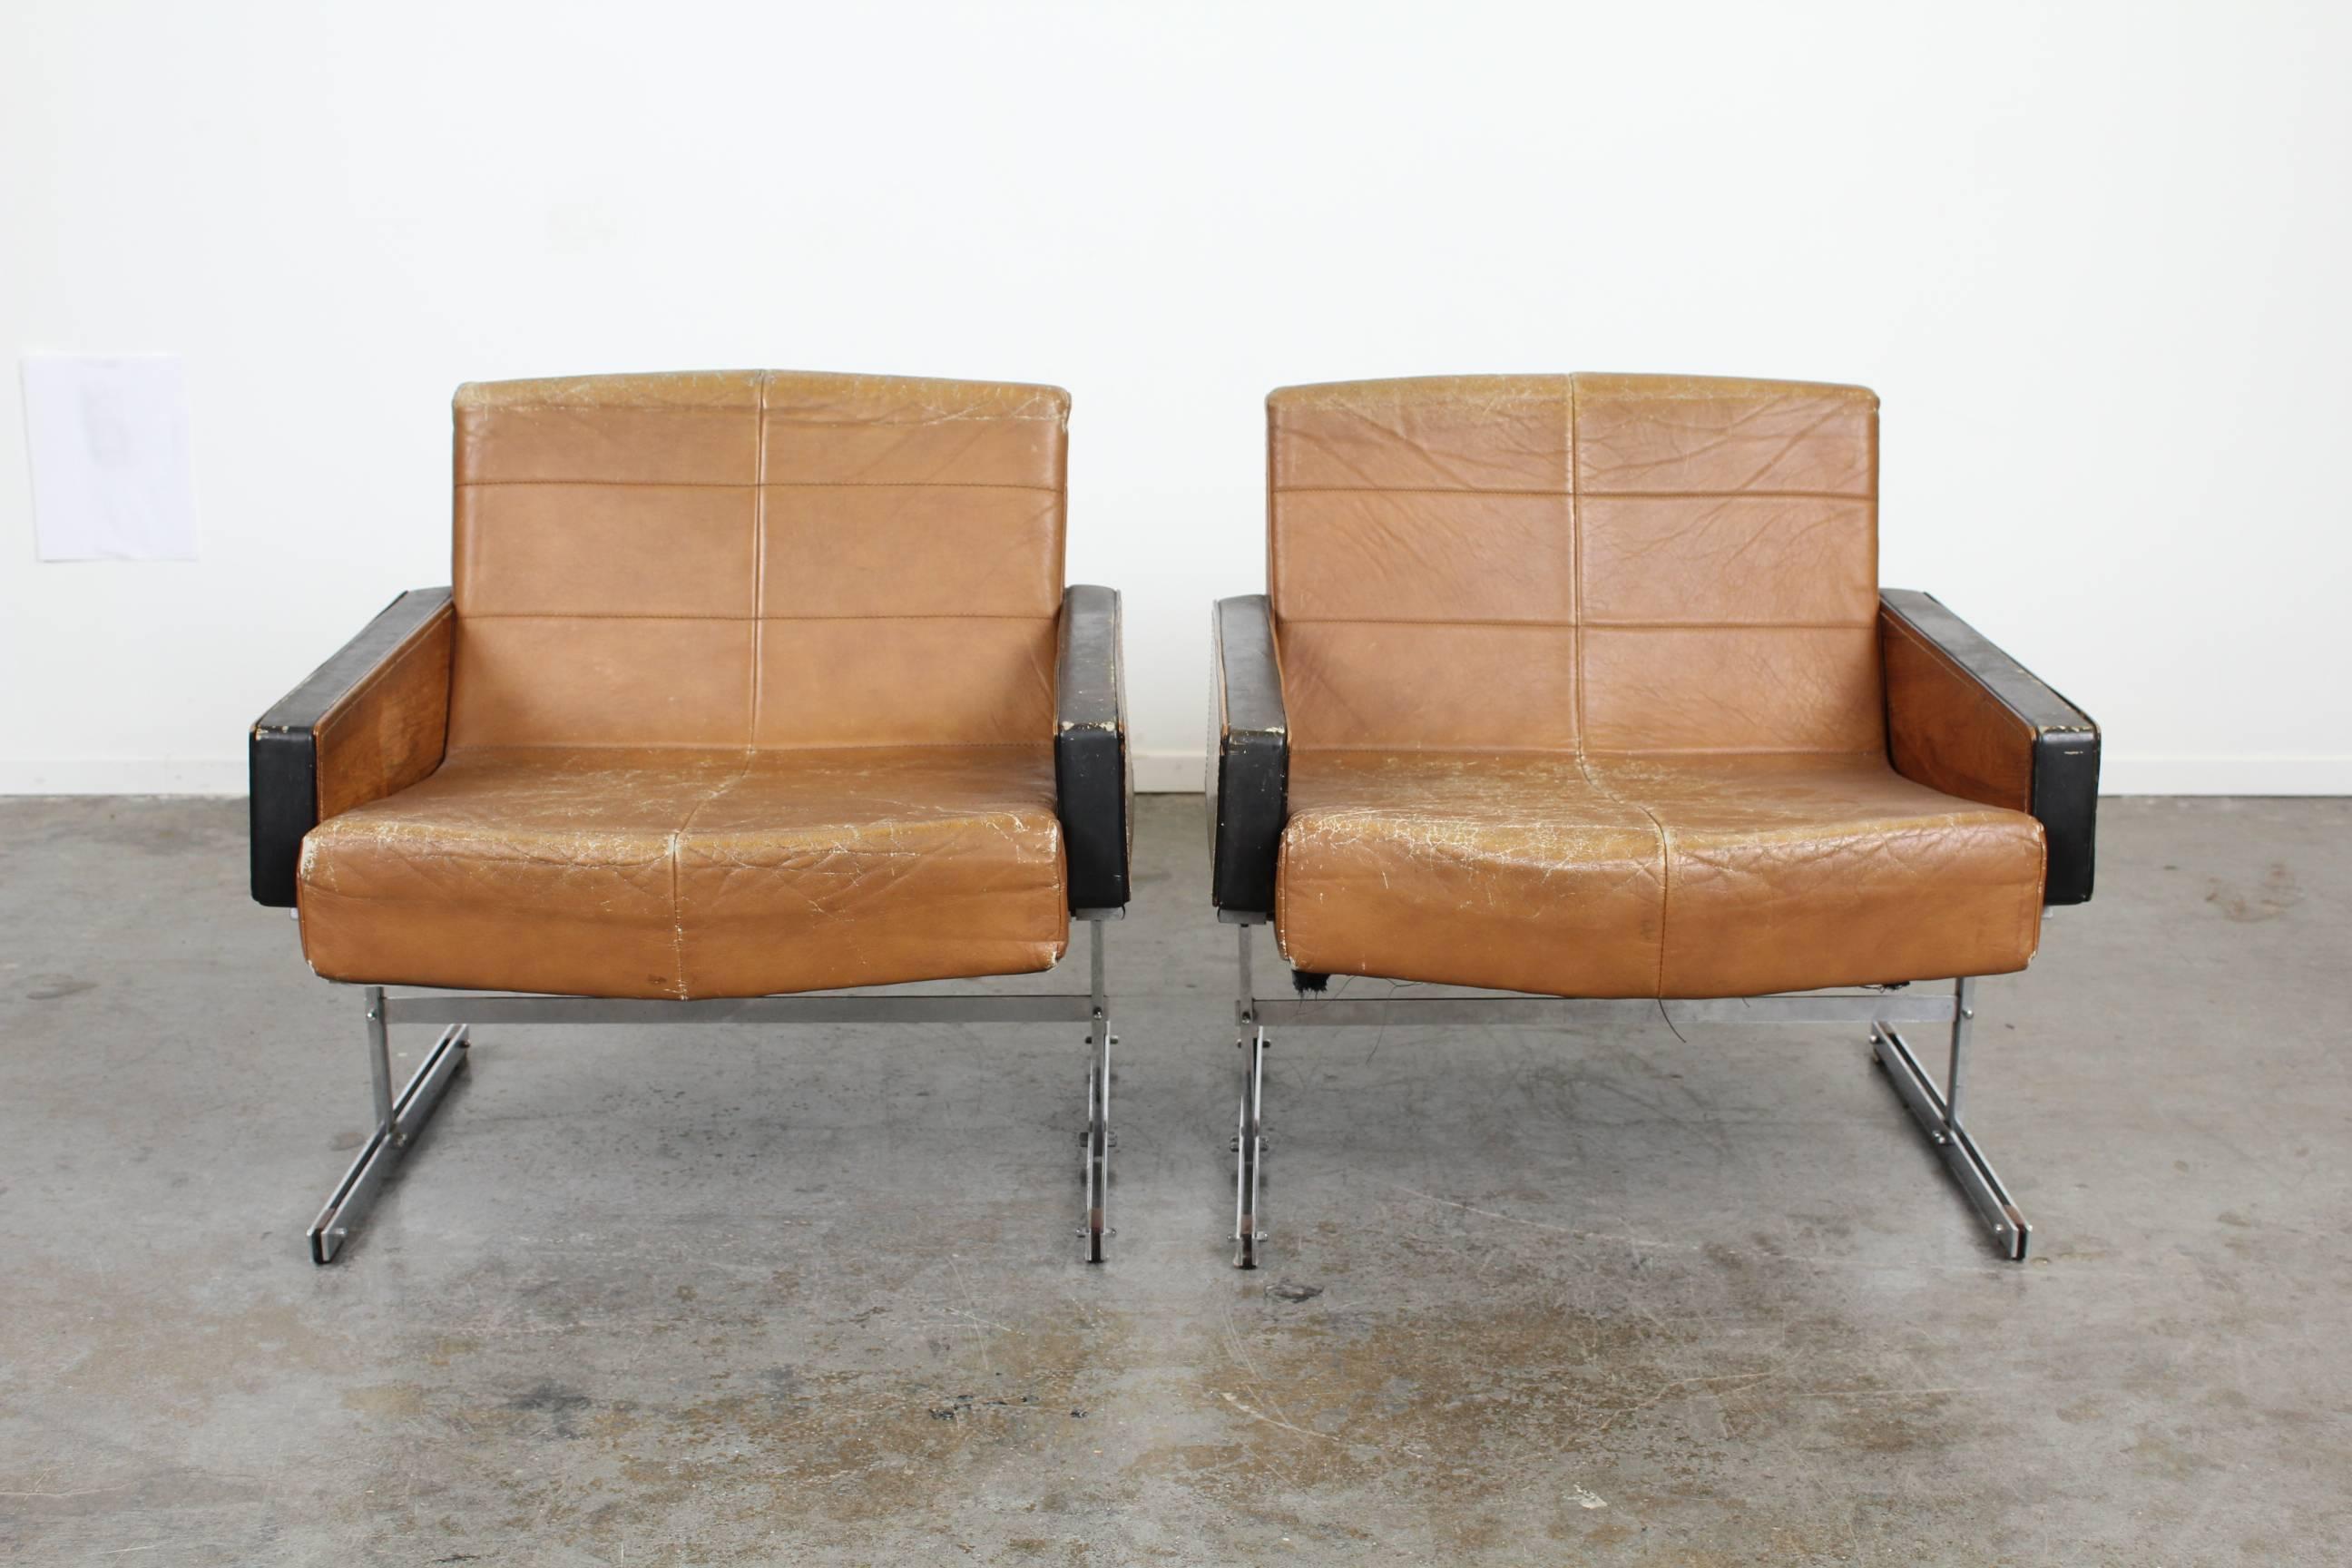 Very rare leather and rosewood chairs on metal legs with stitched tufting. Contrasting darker leather arms with rosewood side inserts define these beautiful chairs. Matching sofa and coffee table if wanted.